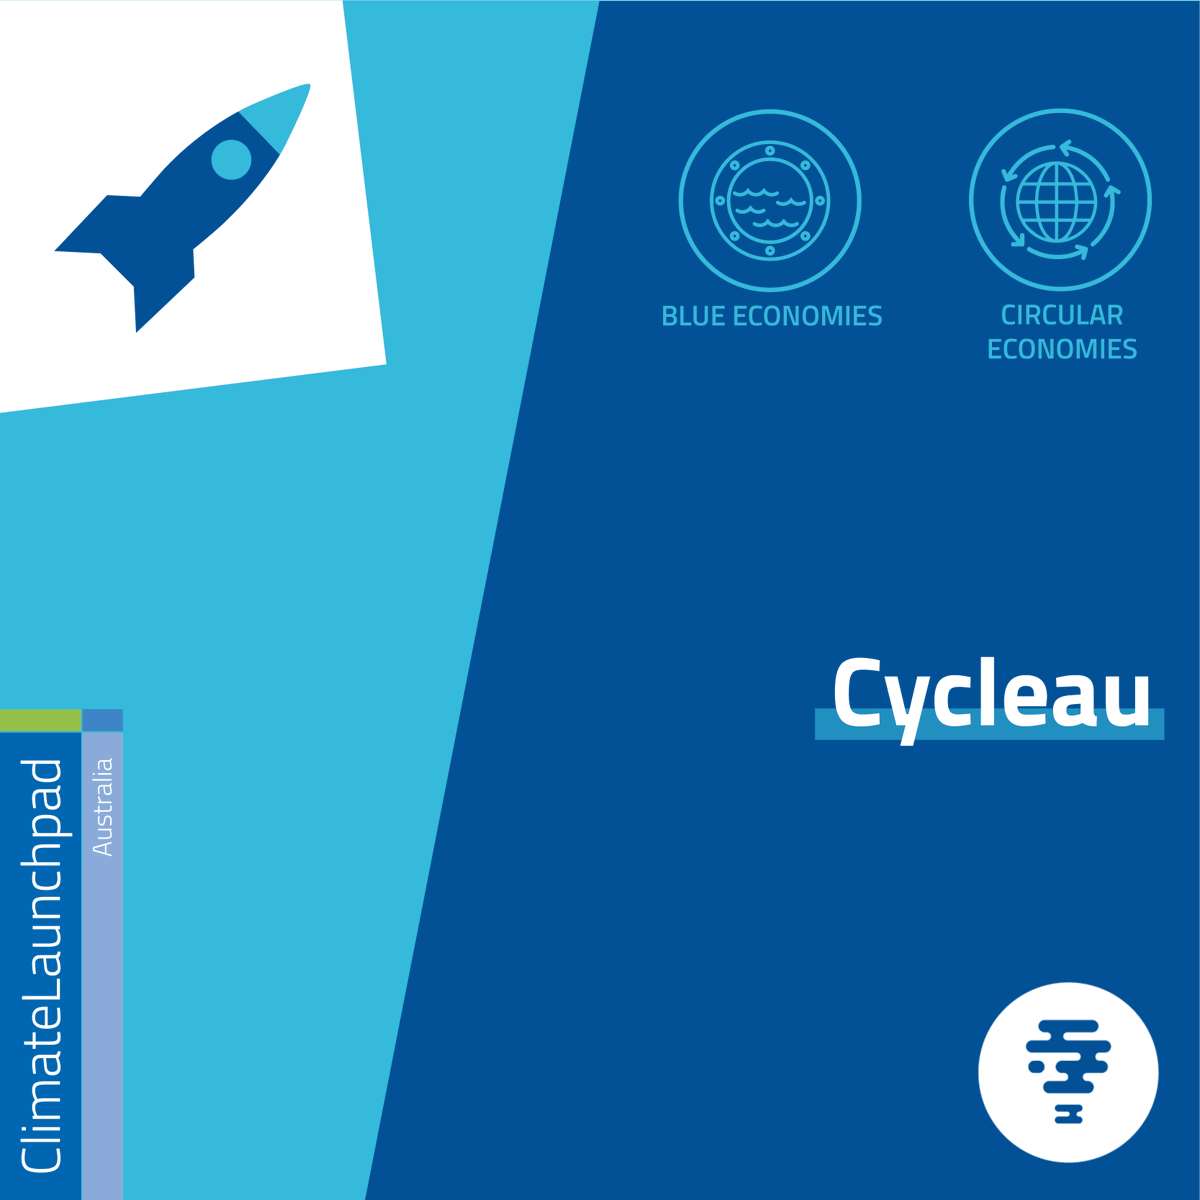 We are delighted to introduce our @ClimateLaunch 2023 Australian Finalists! Cycleau is a compact water treatment system designed to retrofit across sinks, showers & laundry to recycle greywater for potable use. Watch our #CLP23 National Finals @ NEXUS! victoriancleantech.org.au/nexus